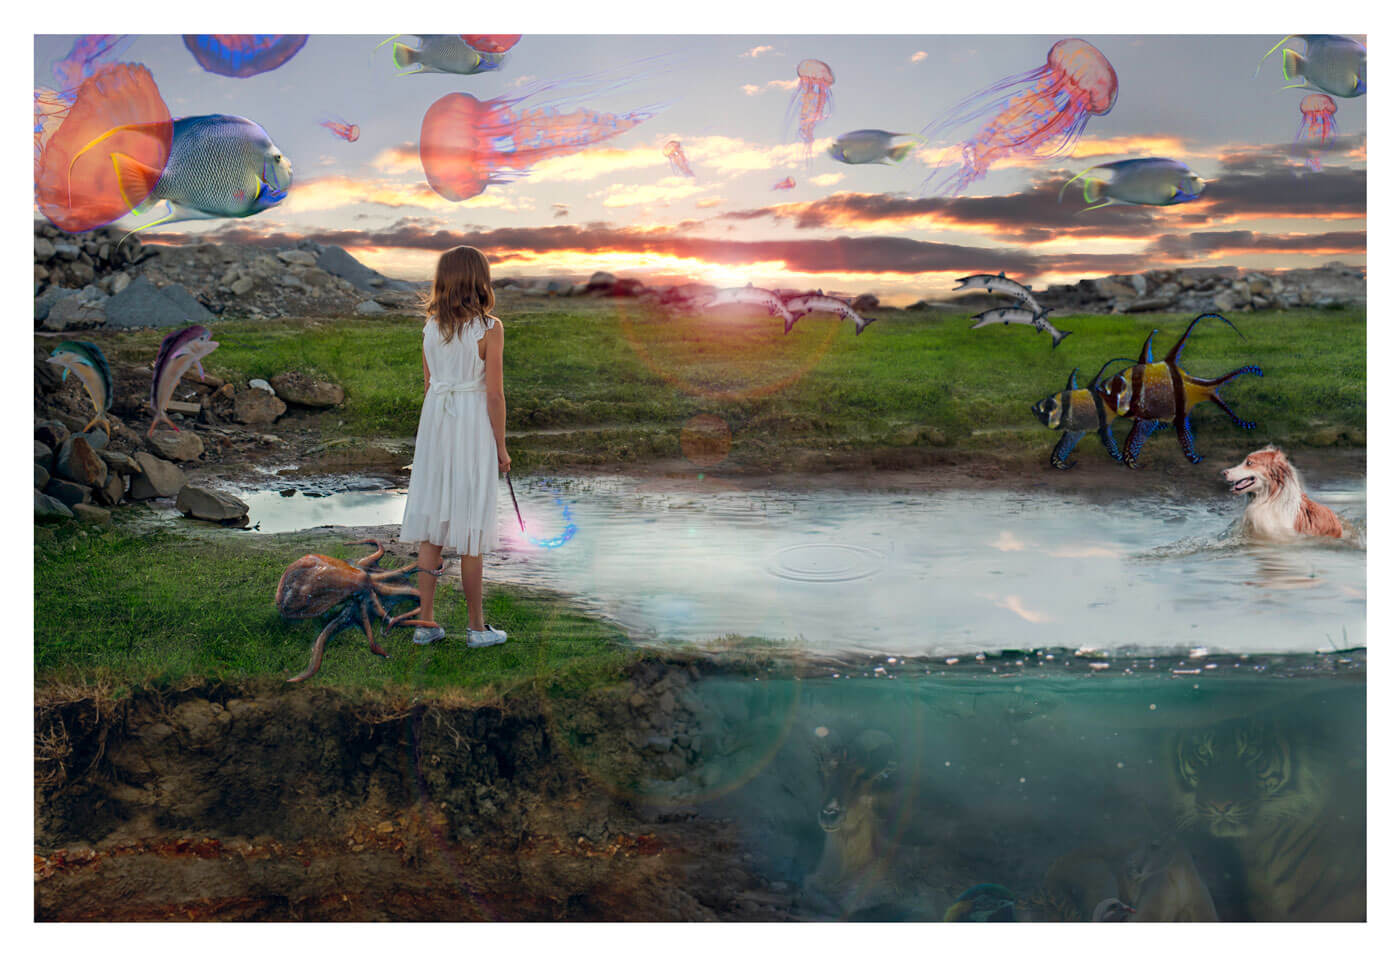 Fantasy image of girl overlooking a pond